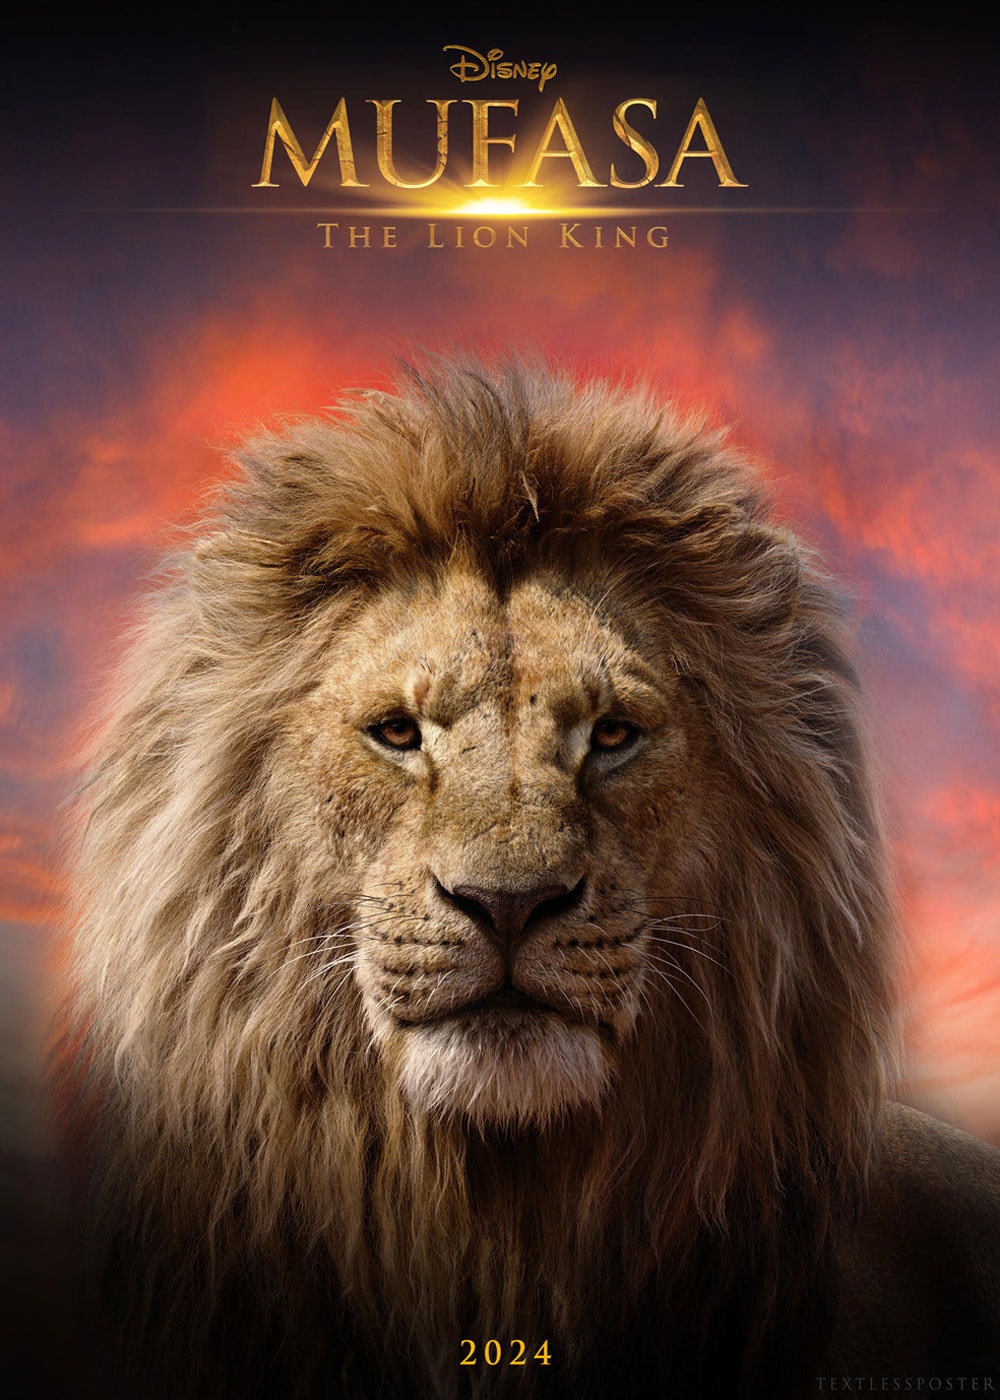 Mufasa The Lion King Movie (2024) Release Date, Review, Cast